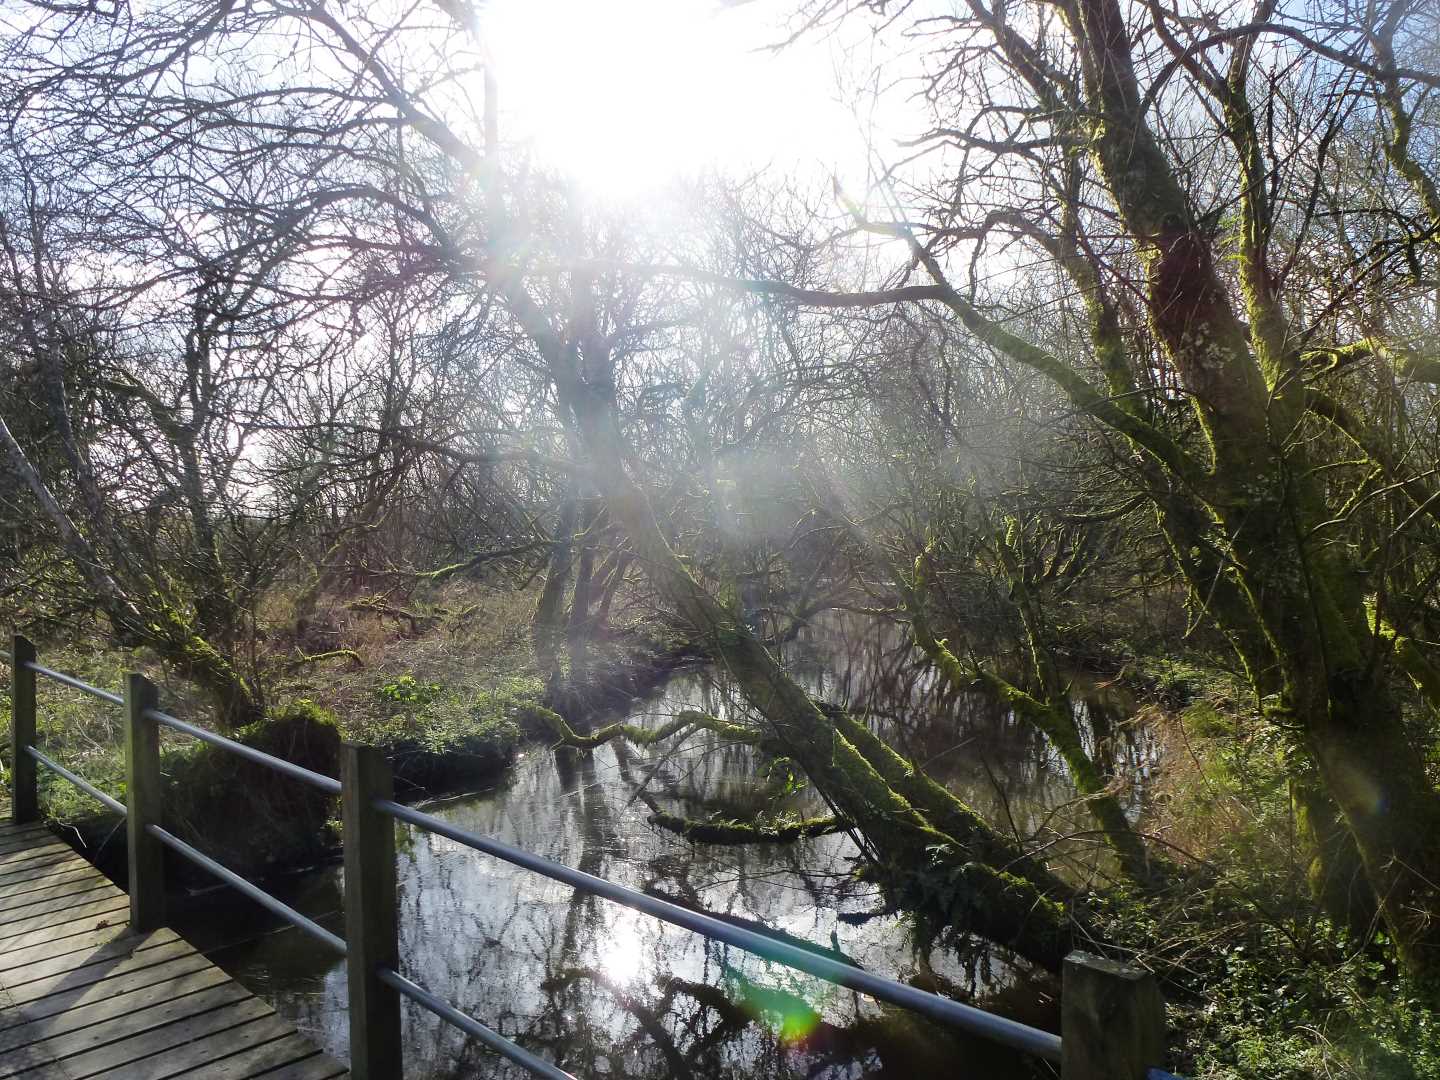 The footbridge in the foreground with trees and the river behind